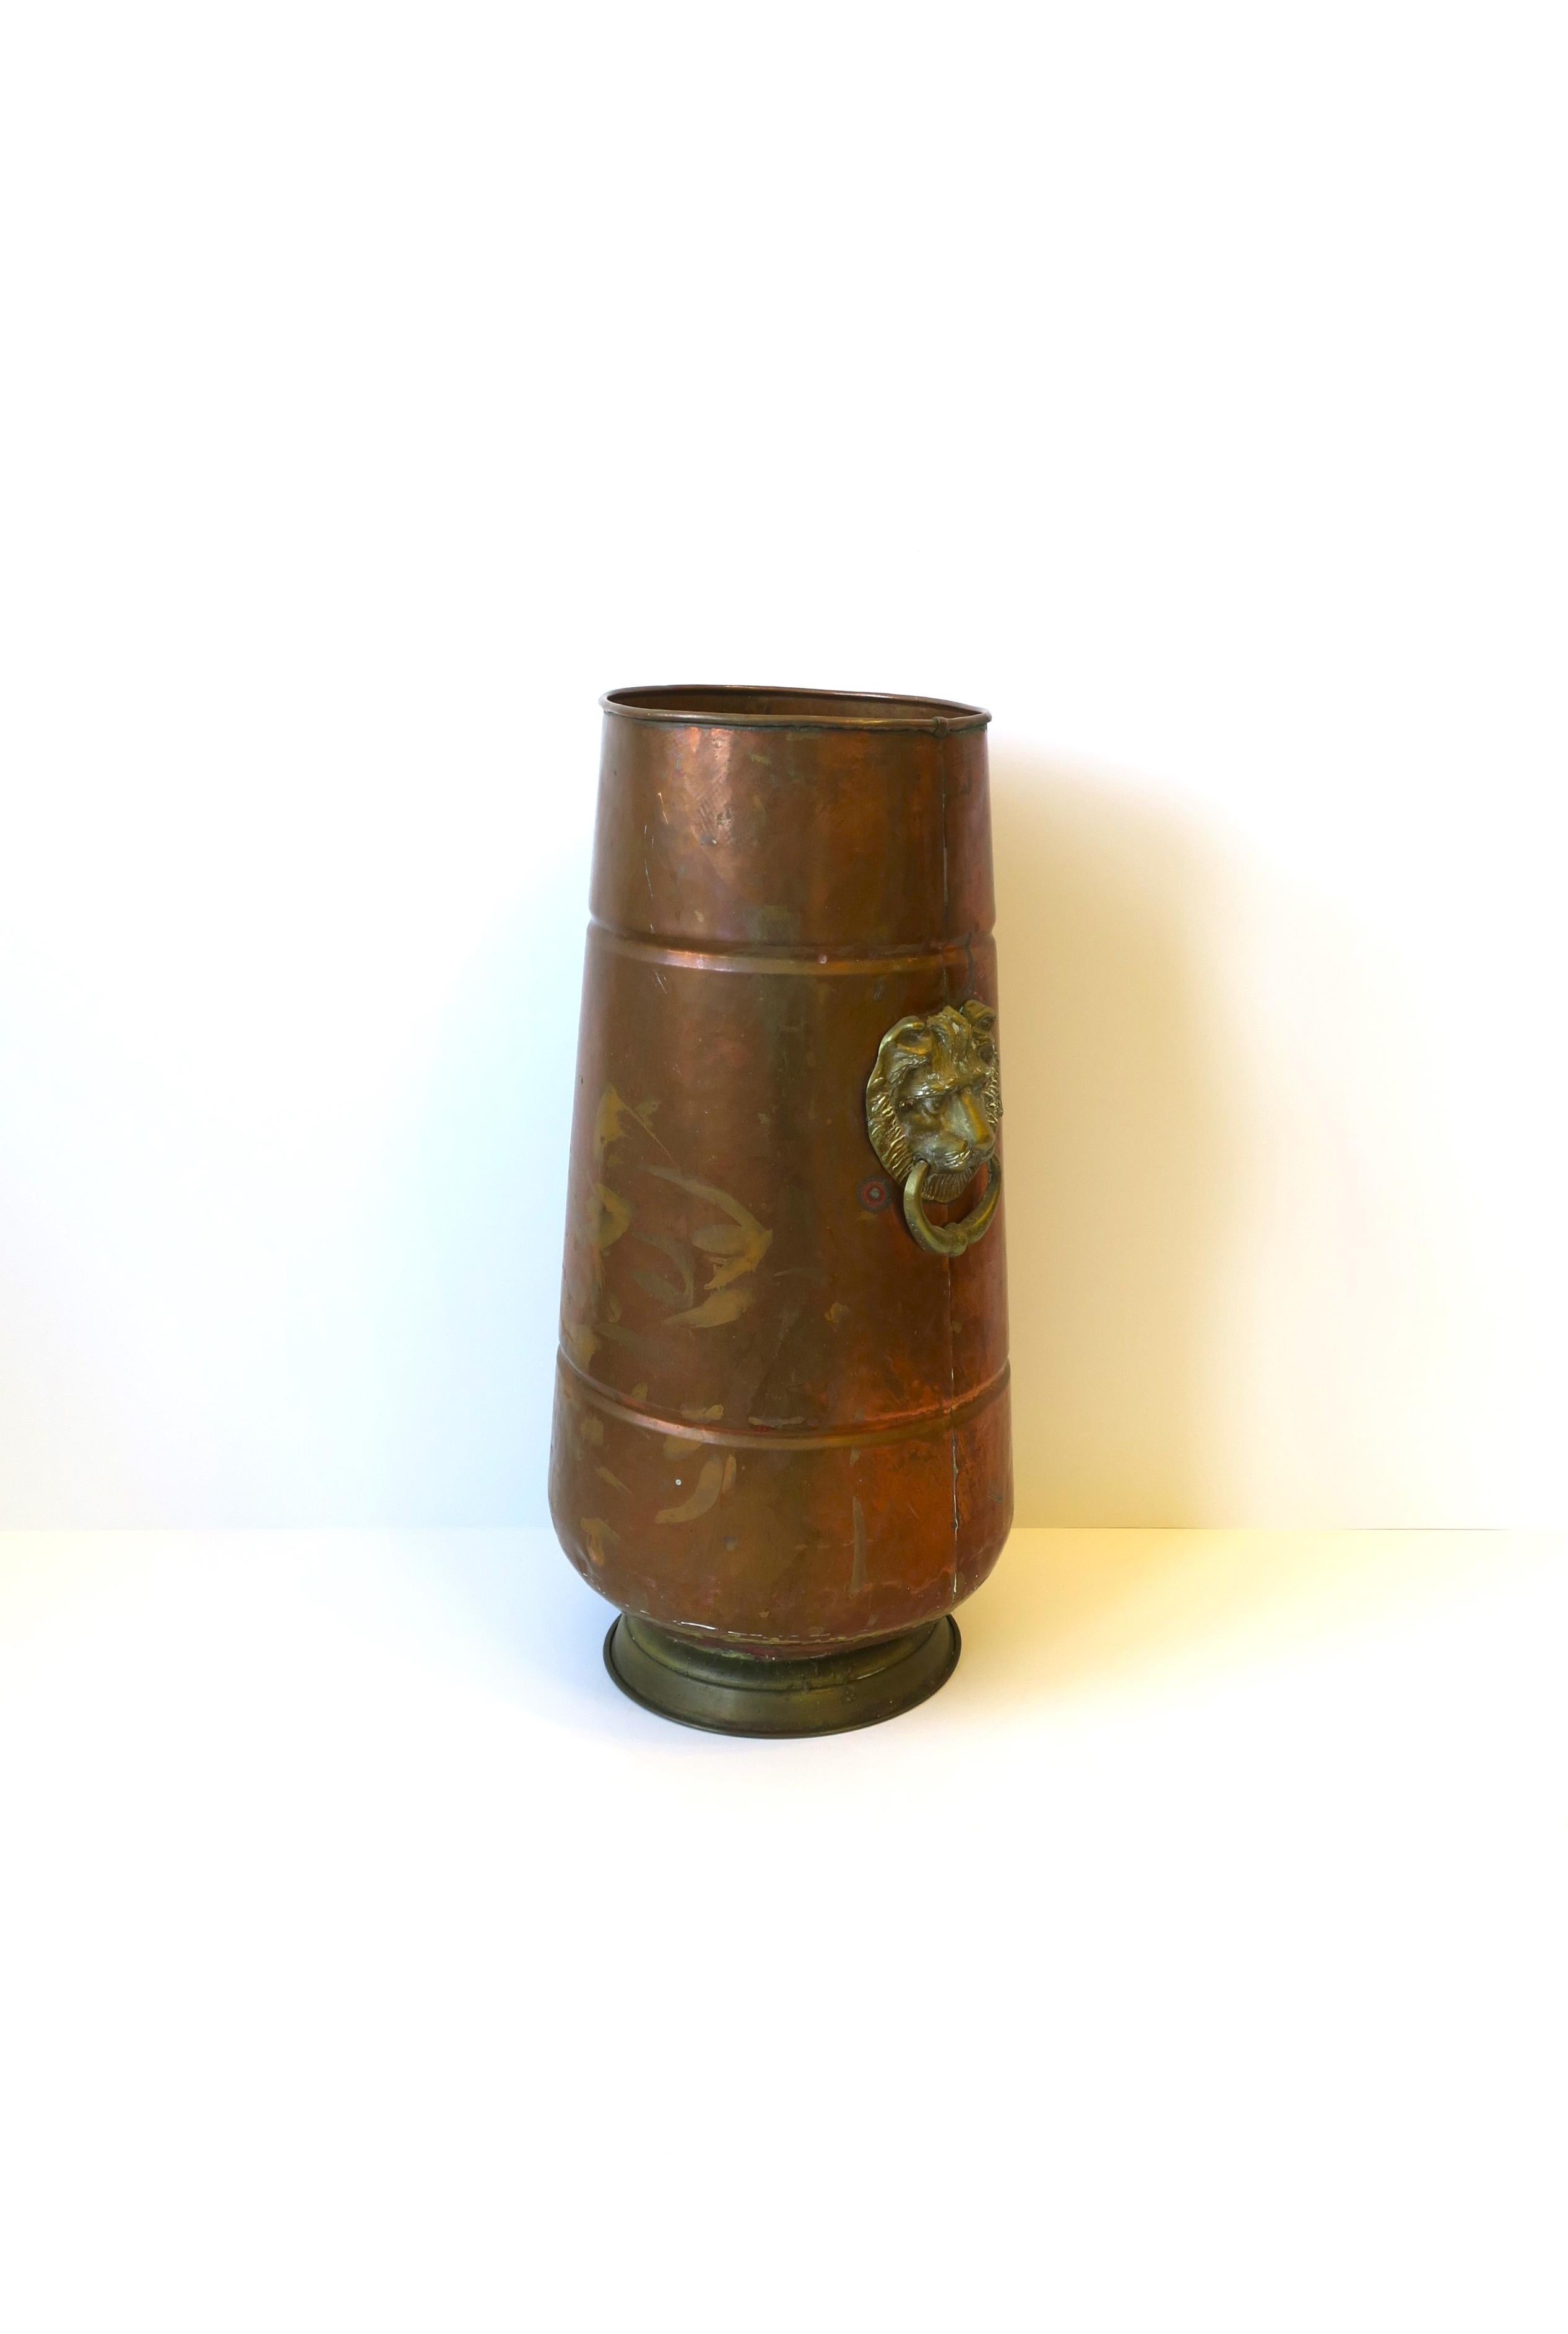 20th Century Umbrella Holder Stand in Copper and Brass with Lion Head Design Regency Style